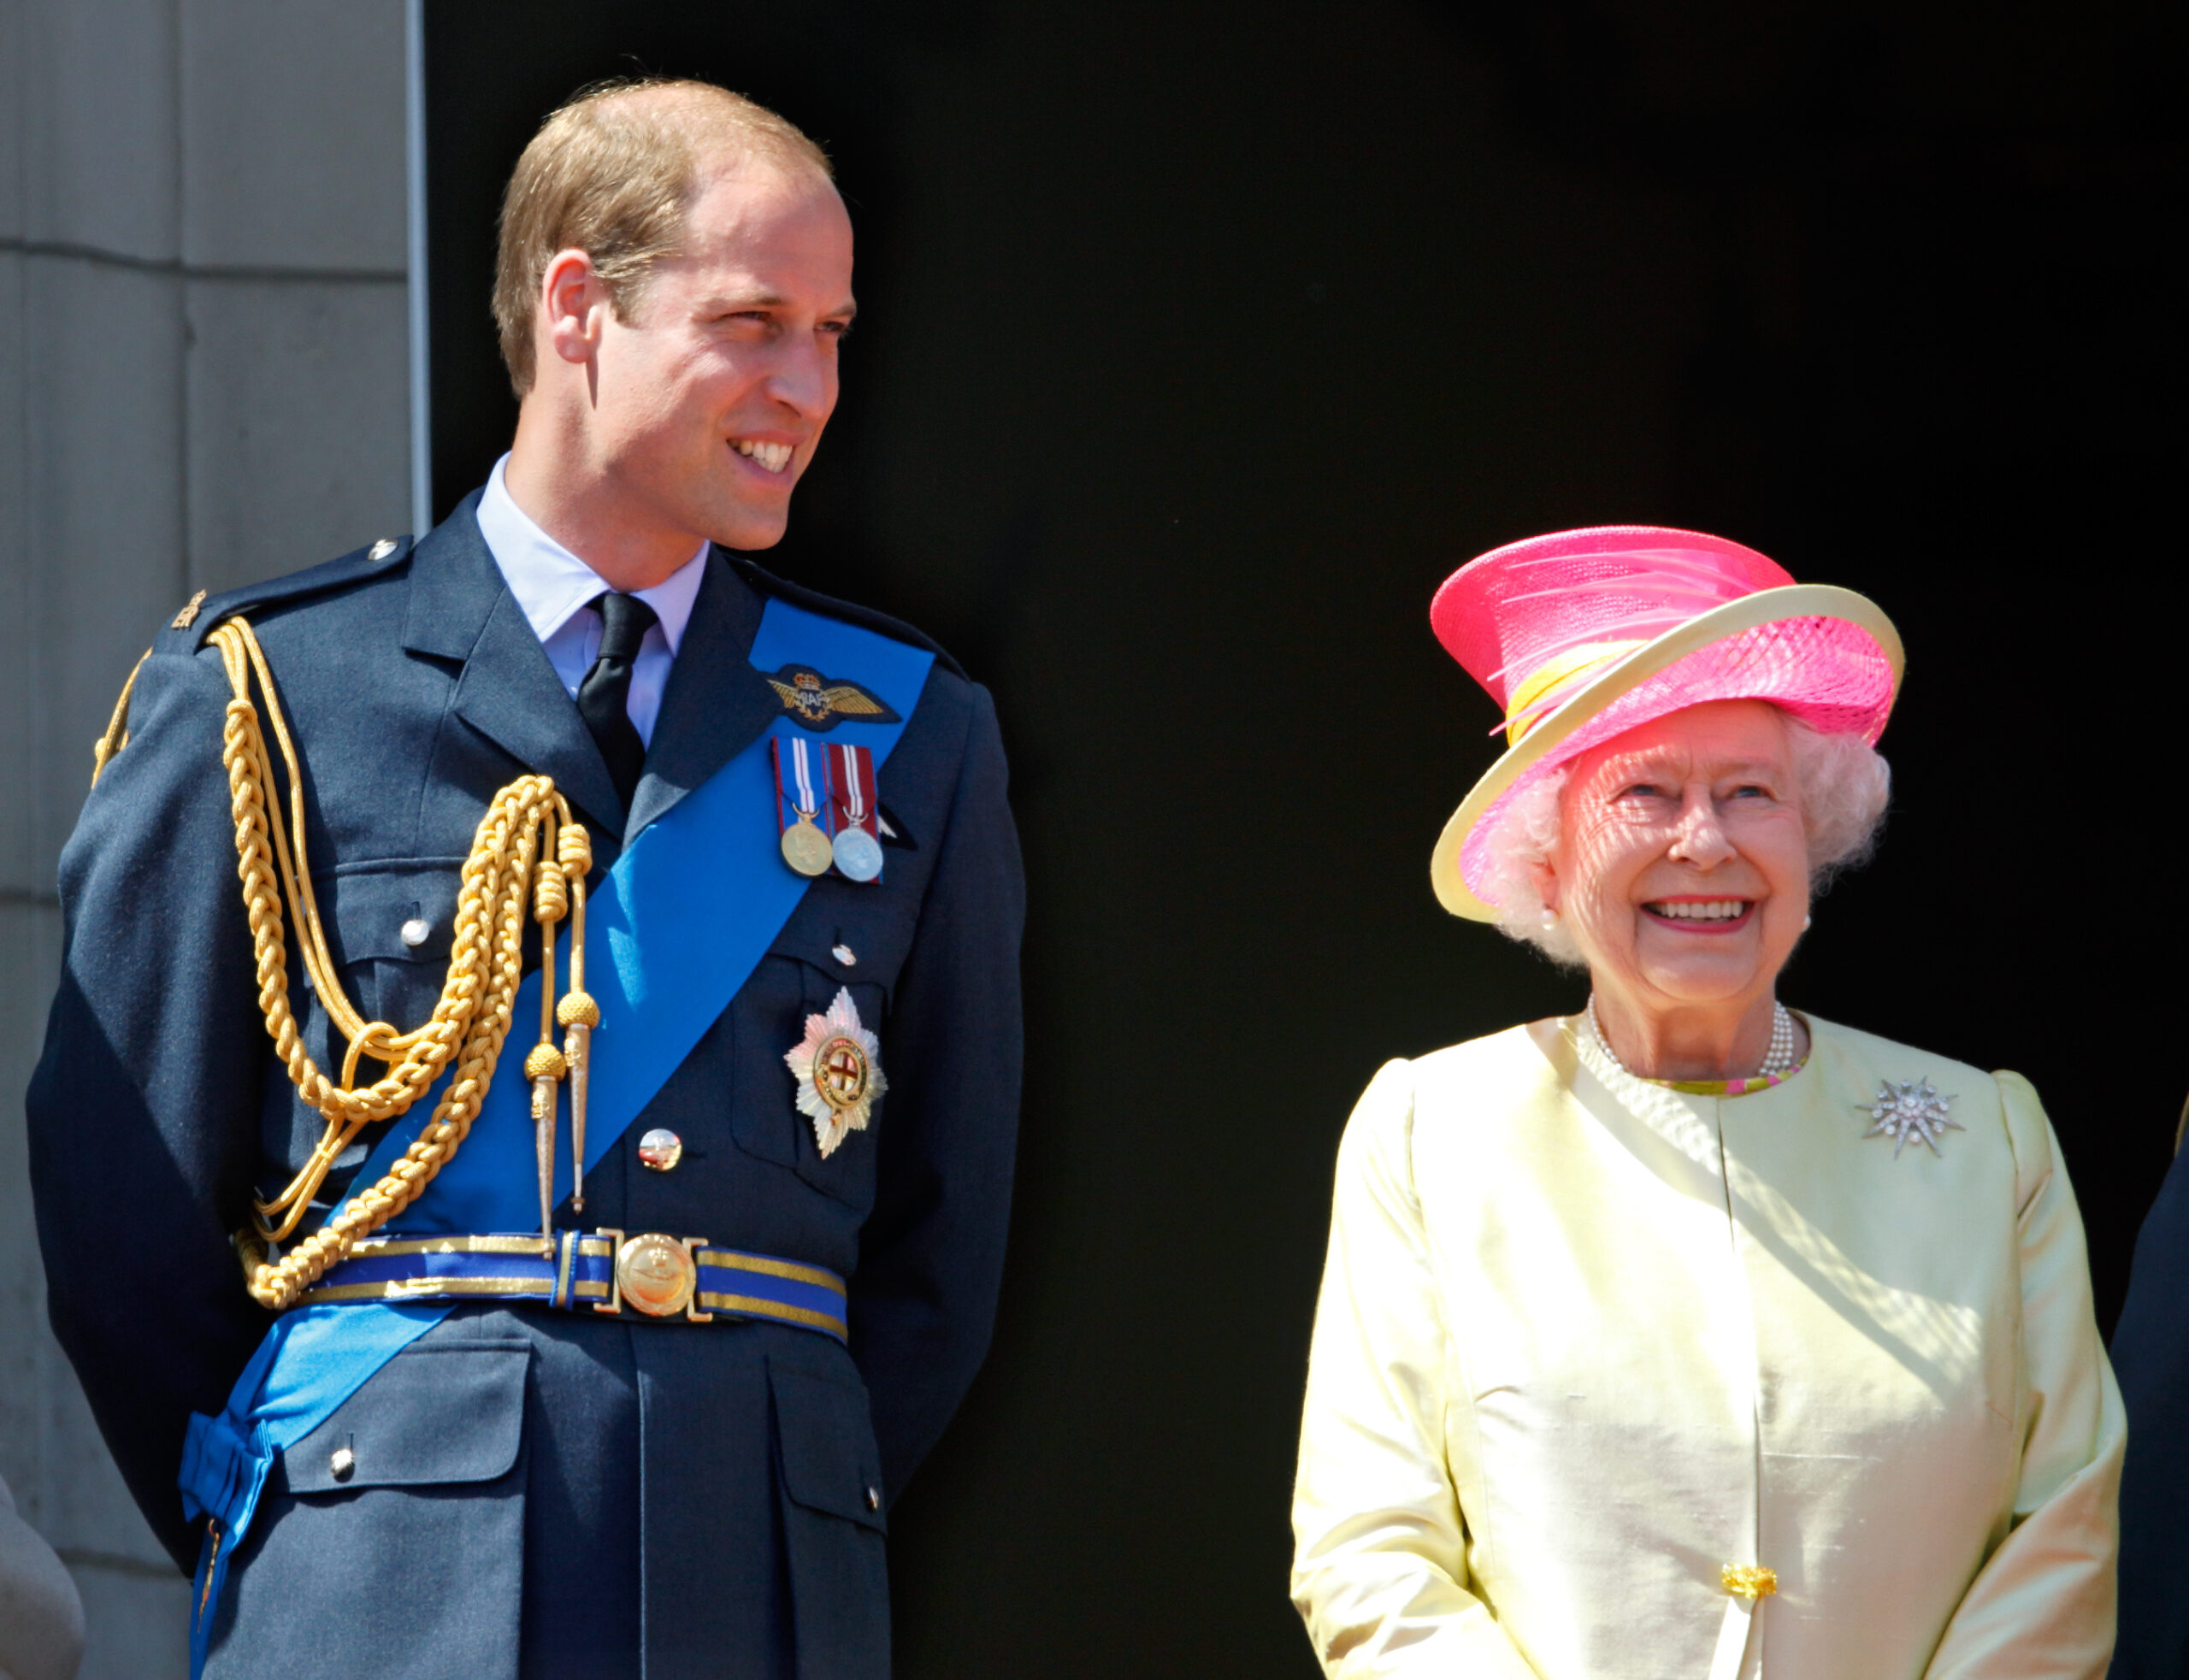 The Queen has been teaching Prince William how to be King